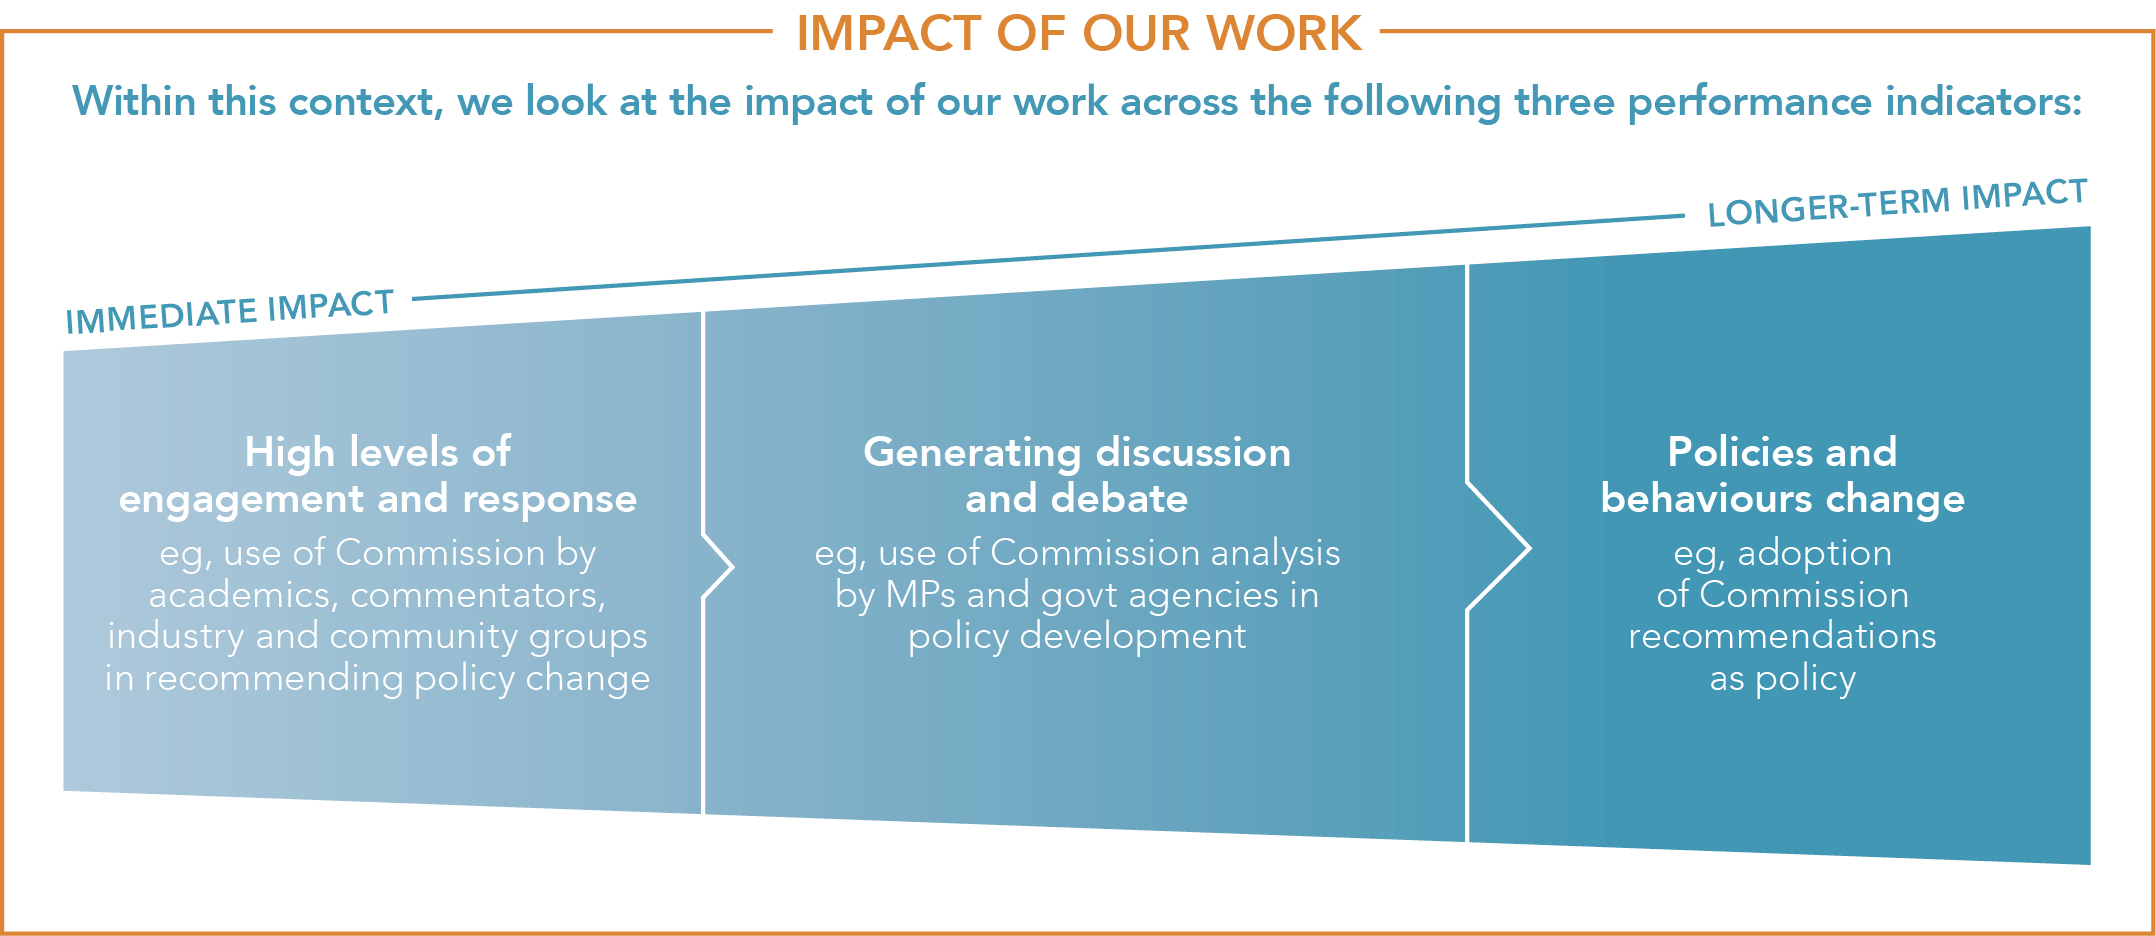 Within this context we look at the impact of our work across the three performance indicators